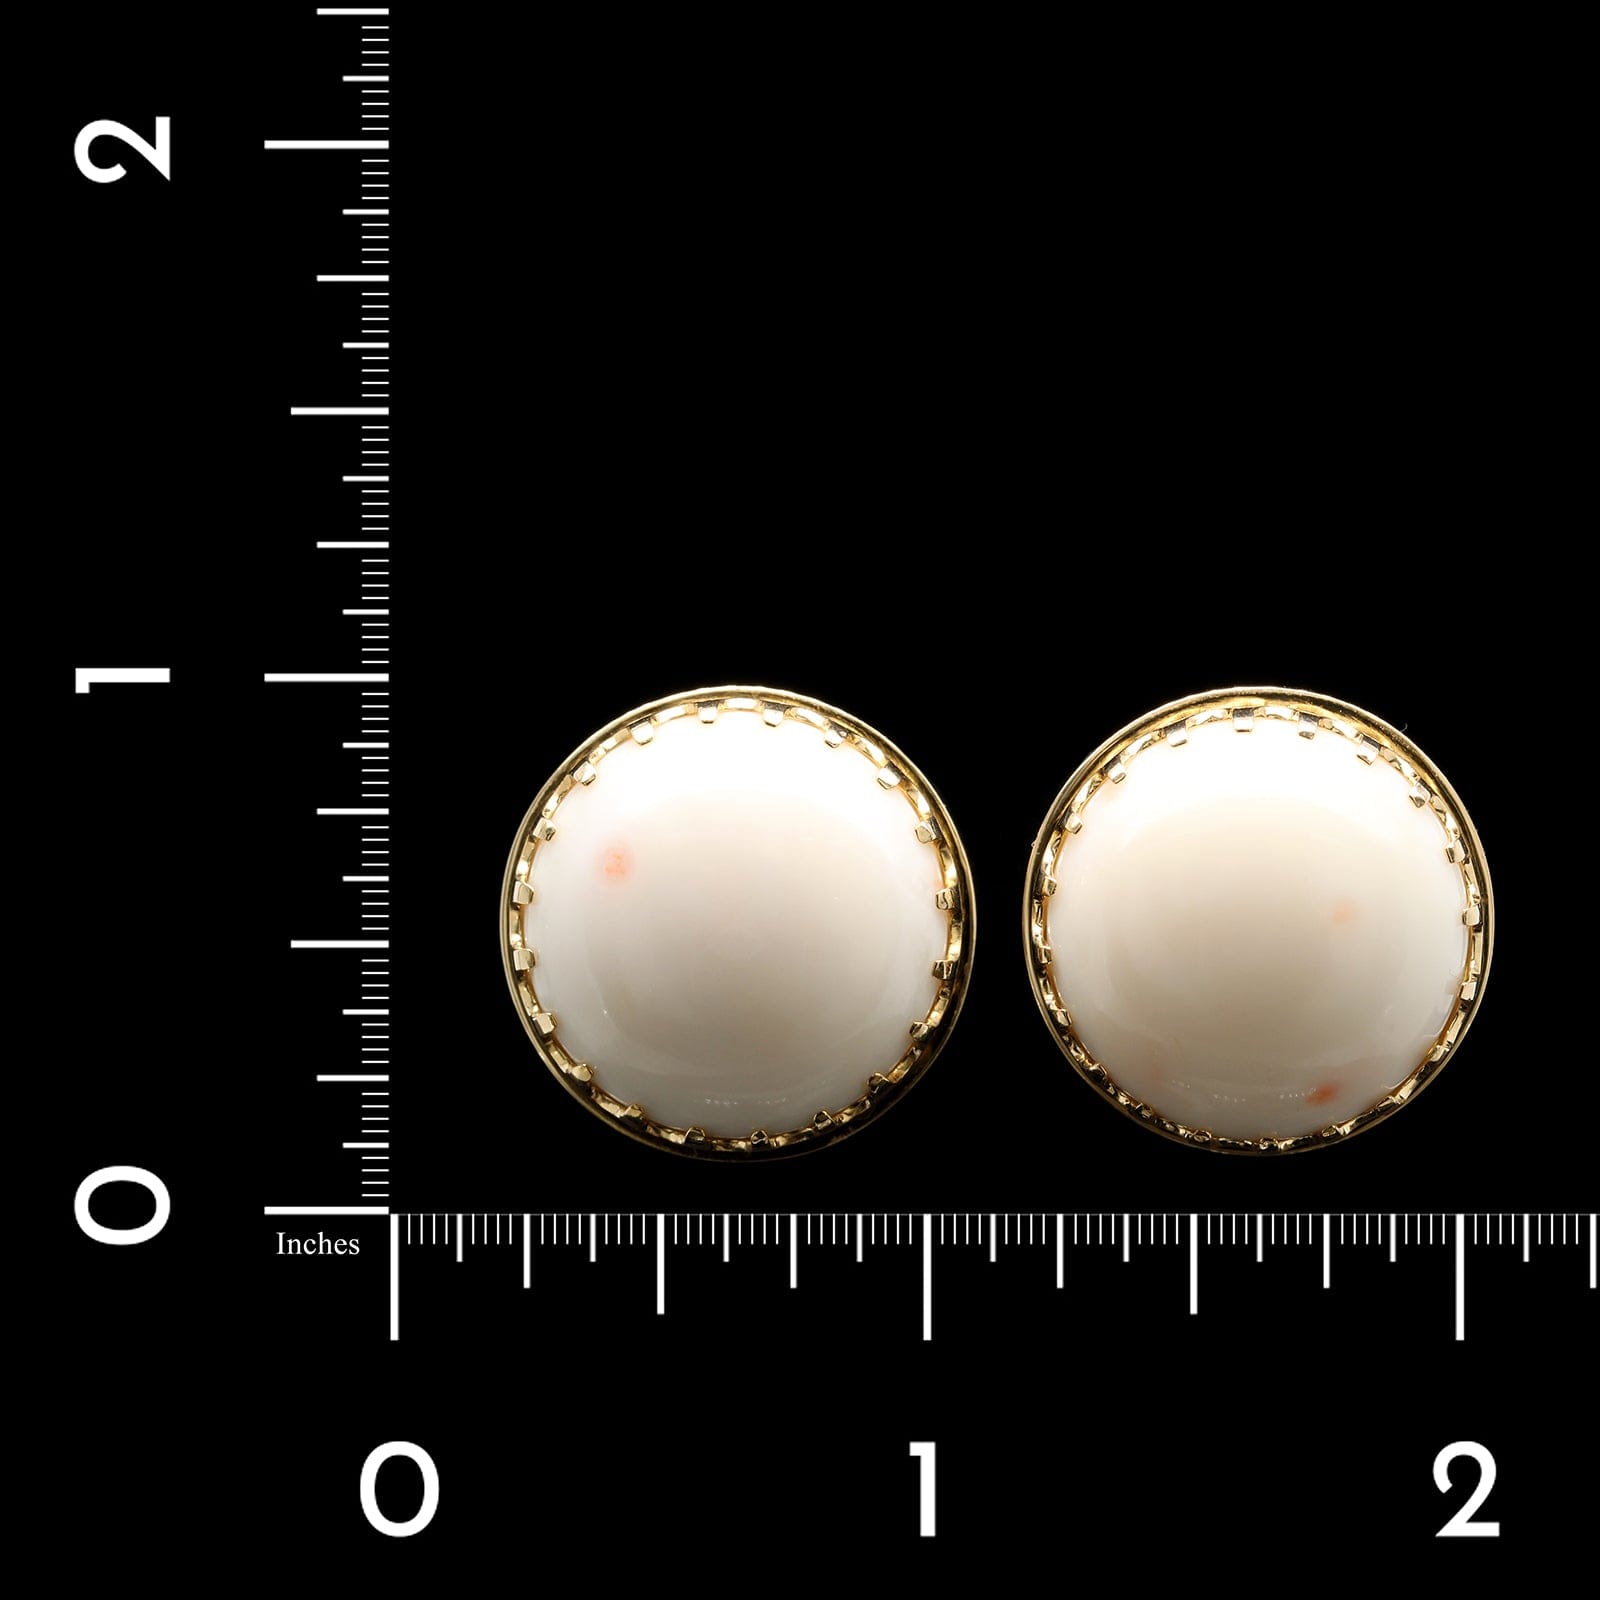 18K Two-tone Gold Estate White Coral Earrings